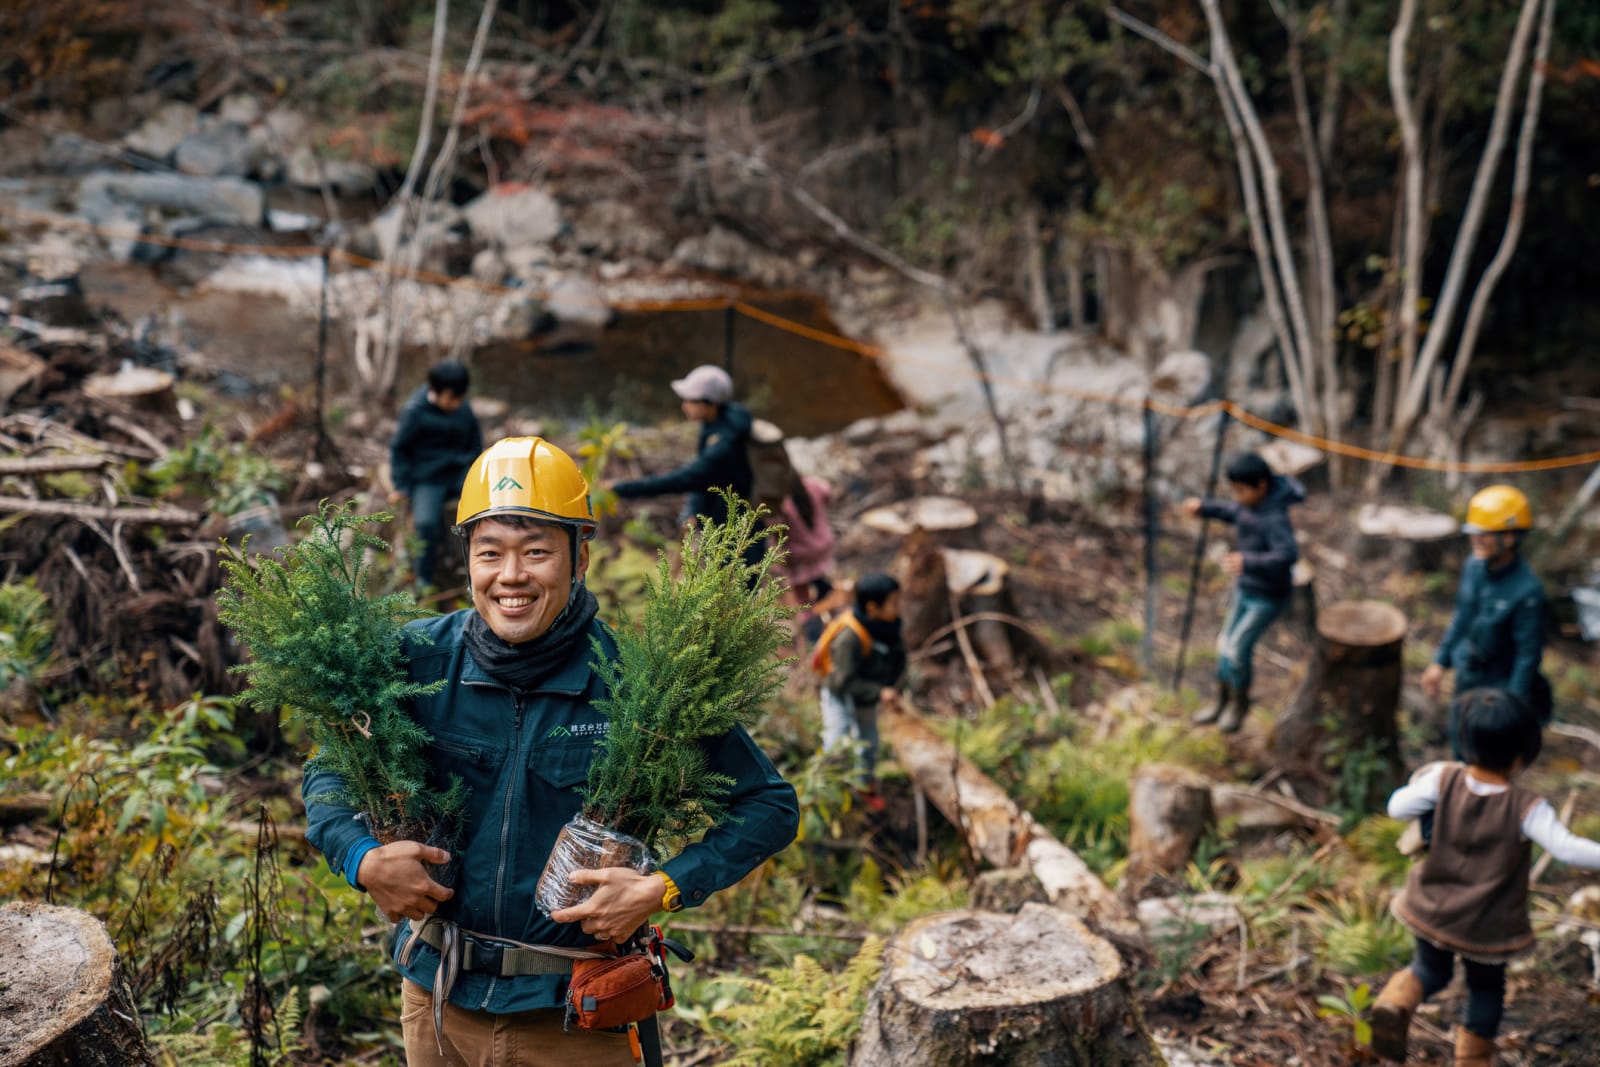 Man holding two small trees smiling to camera while other people plant trees in background